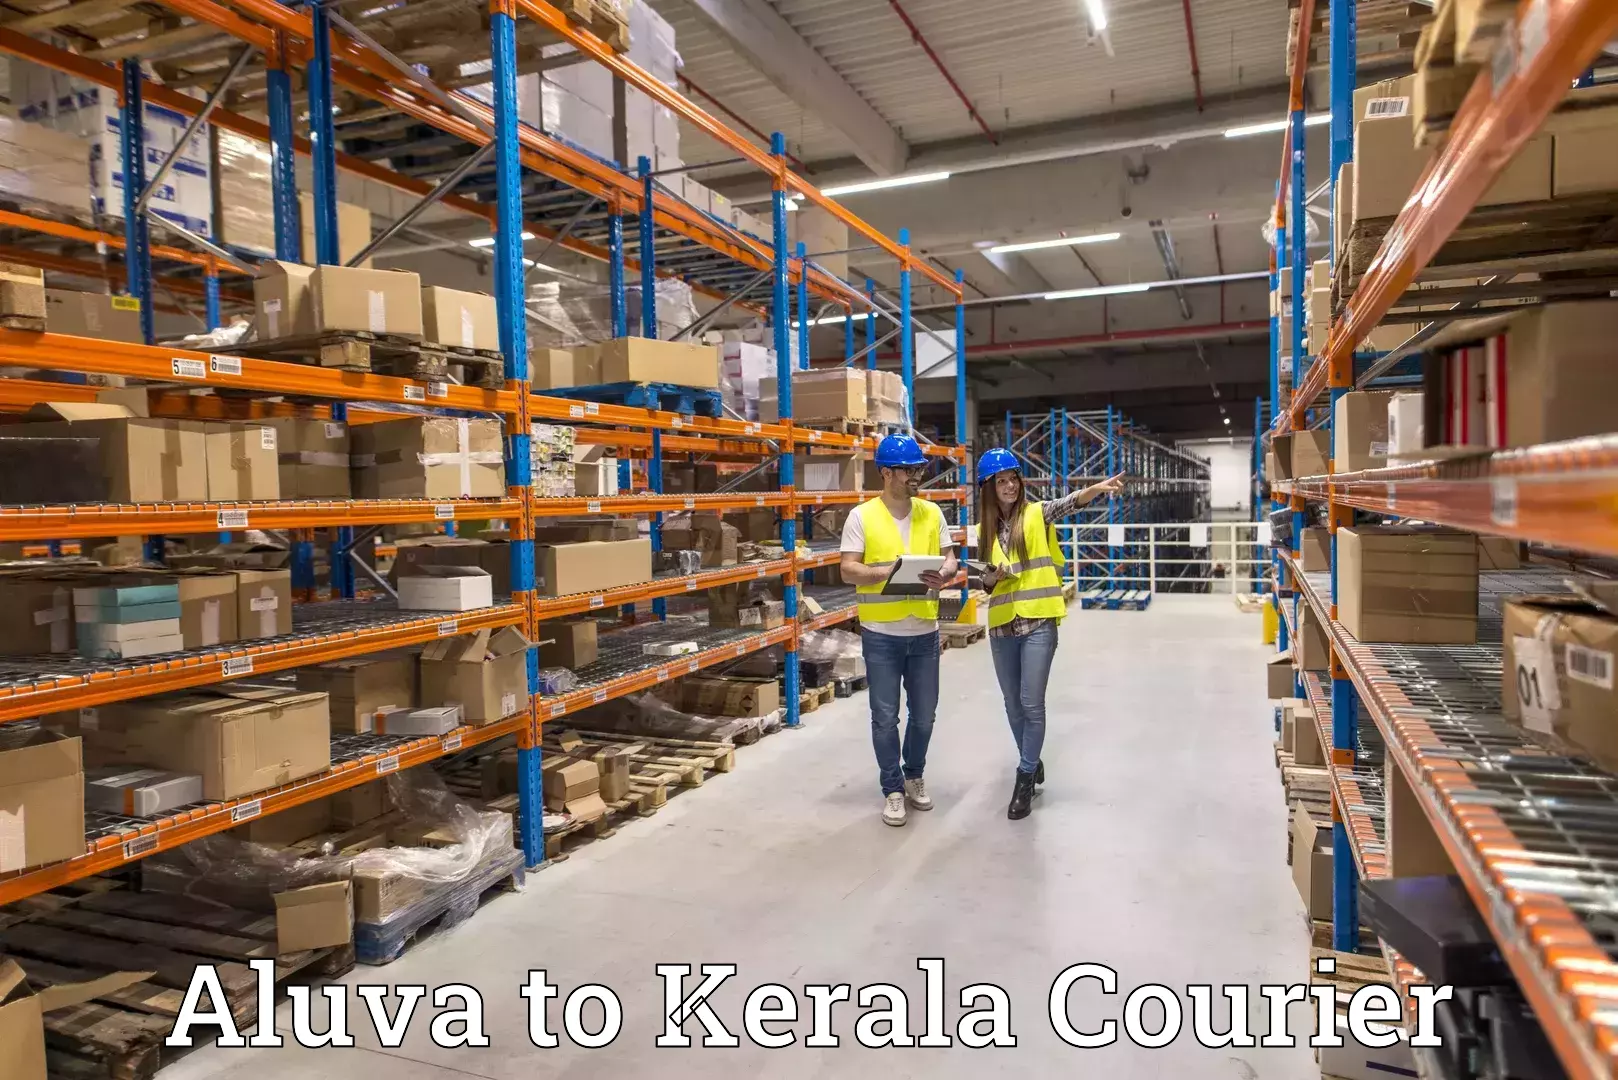 On-call courier service Aluva to Trivandrum